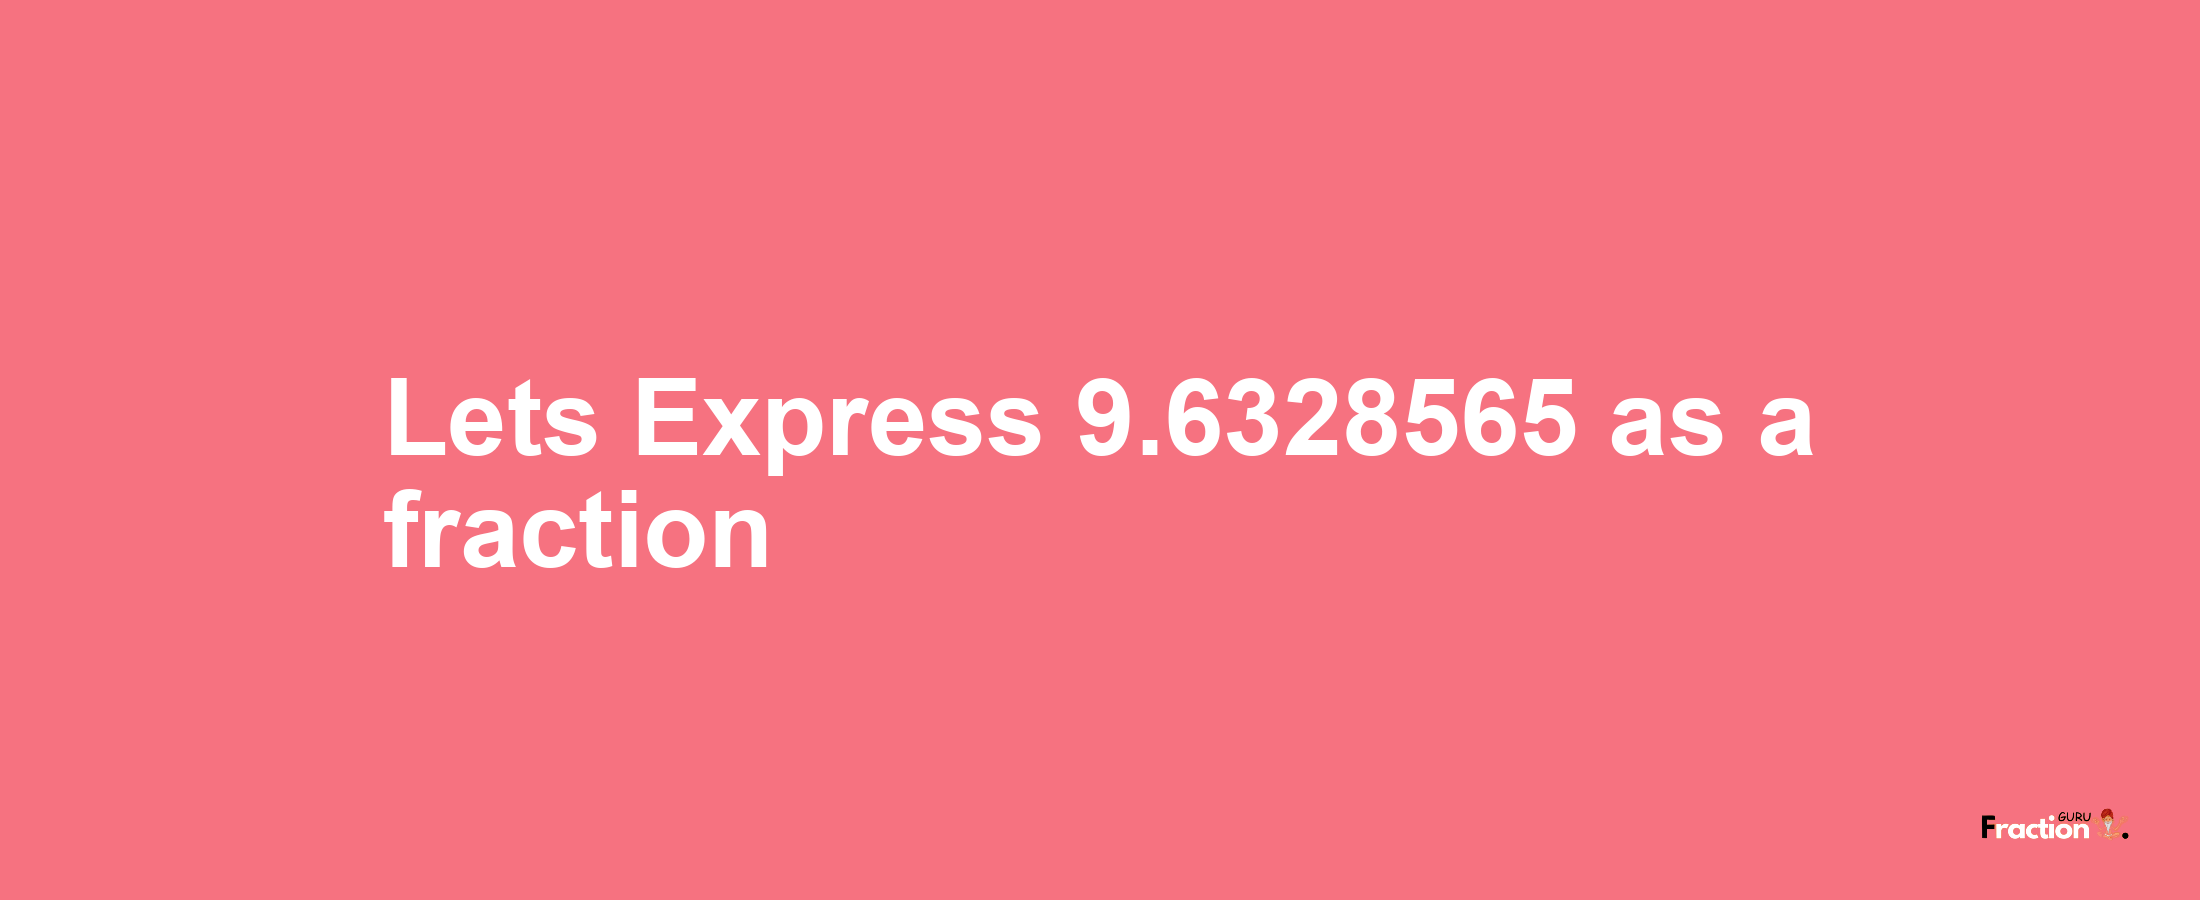 Lets Express 9.6328565 as afraction